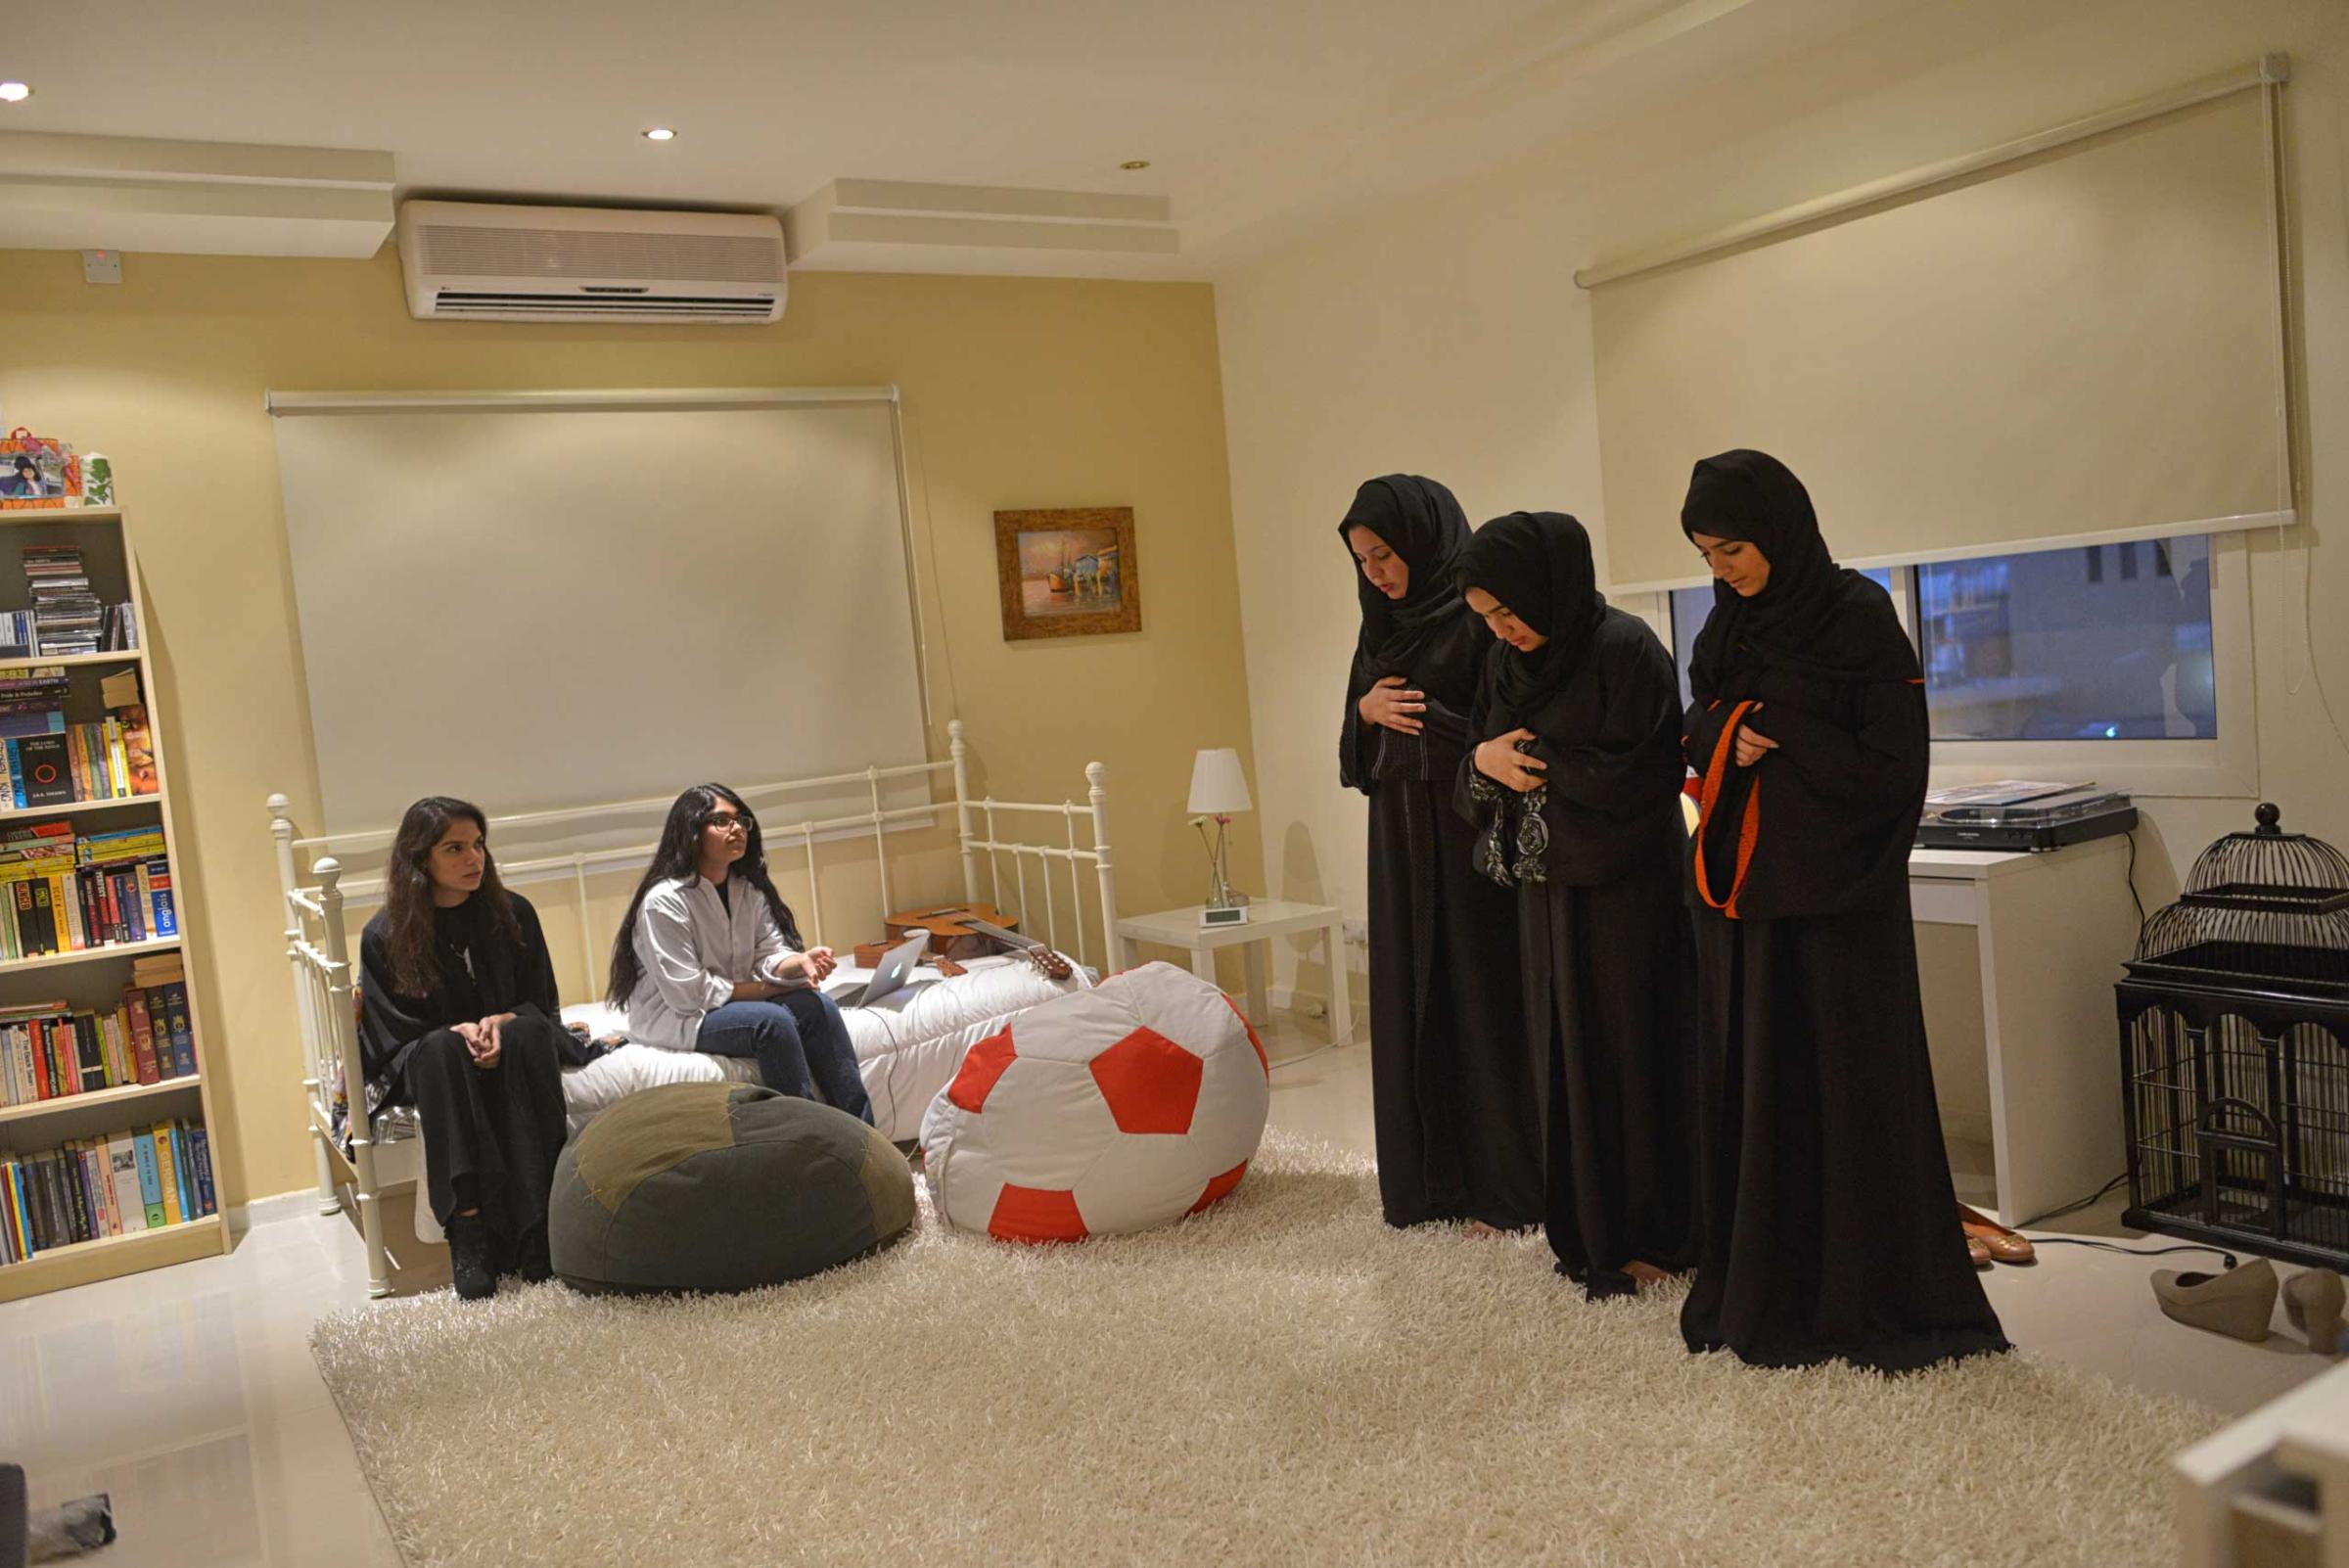 Young Saudi women pray in a friend's home before going out to dinner in Riyadh, Saudi Arabia, February 25, 2013.  Though statistics are difficult to confirm, youth unemployment and poverty are on the rise in Saudi Arabia.  While society is increasingly open to women in the workforce, there are still limited jobs in which women and men can work side by side.  There are a great number of highly educated Saudis who can not find work suitable for their qualifications.  (Credit: Lynsey Addario/ VII)